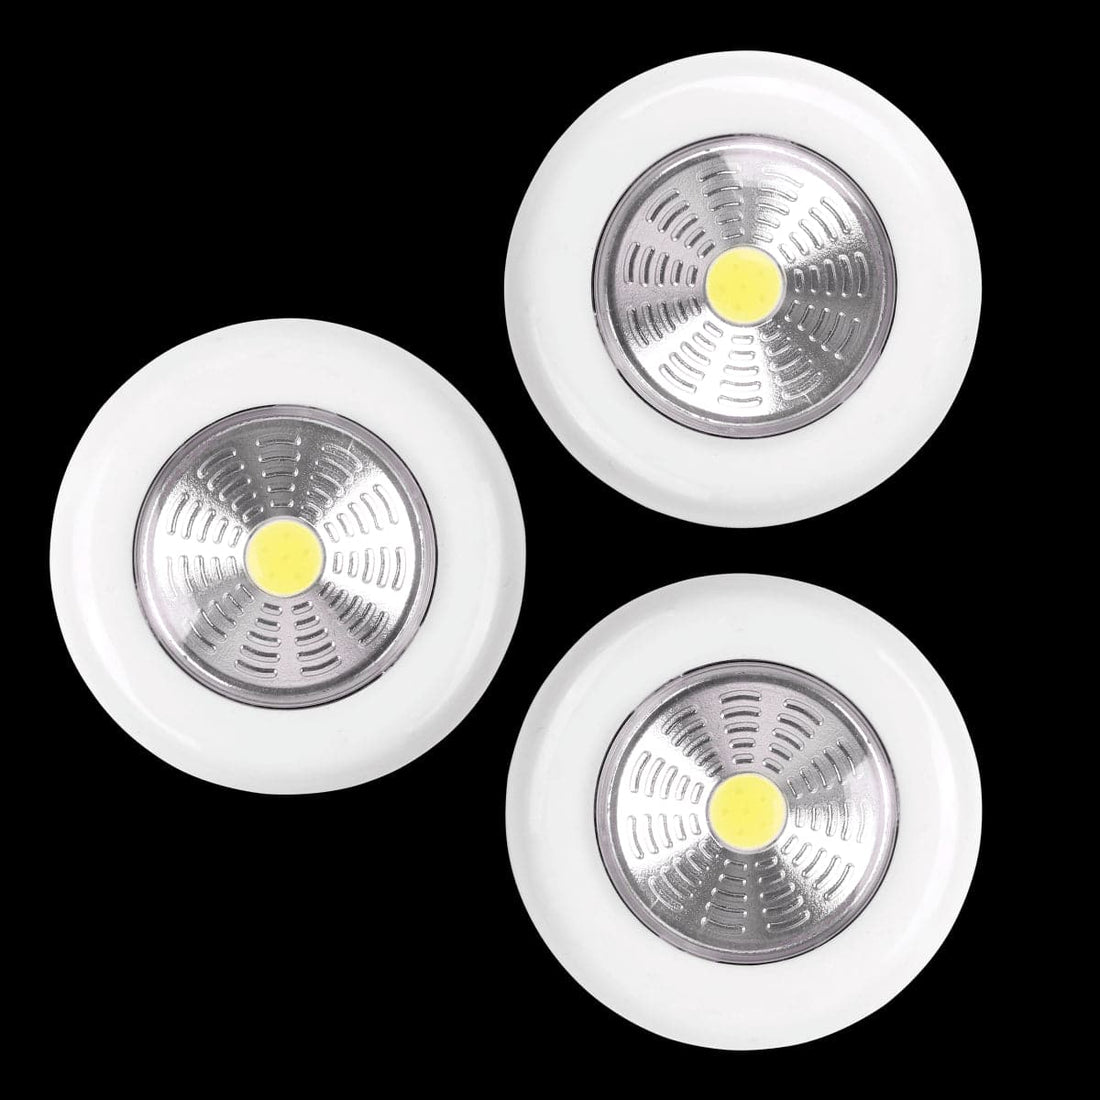 3 PUSHLIGHTS PLASTIC WHITE D6,8 CM LED 50LM NATURAL LIGHT BATTERY OPERATED